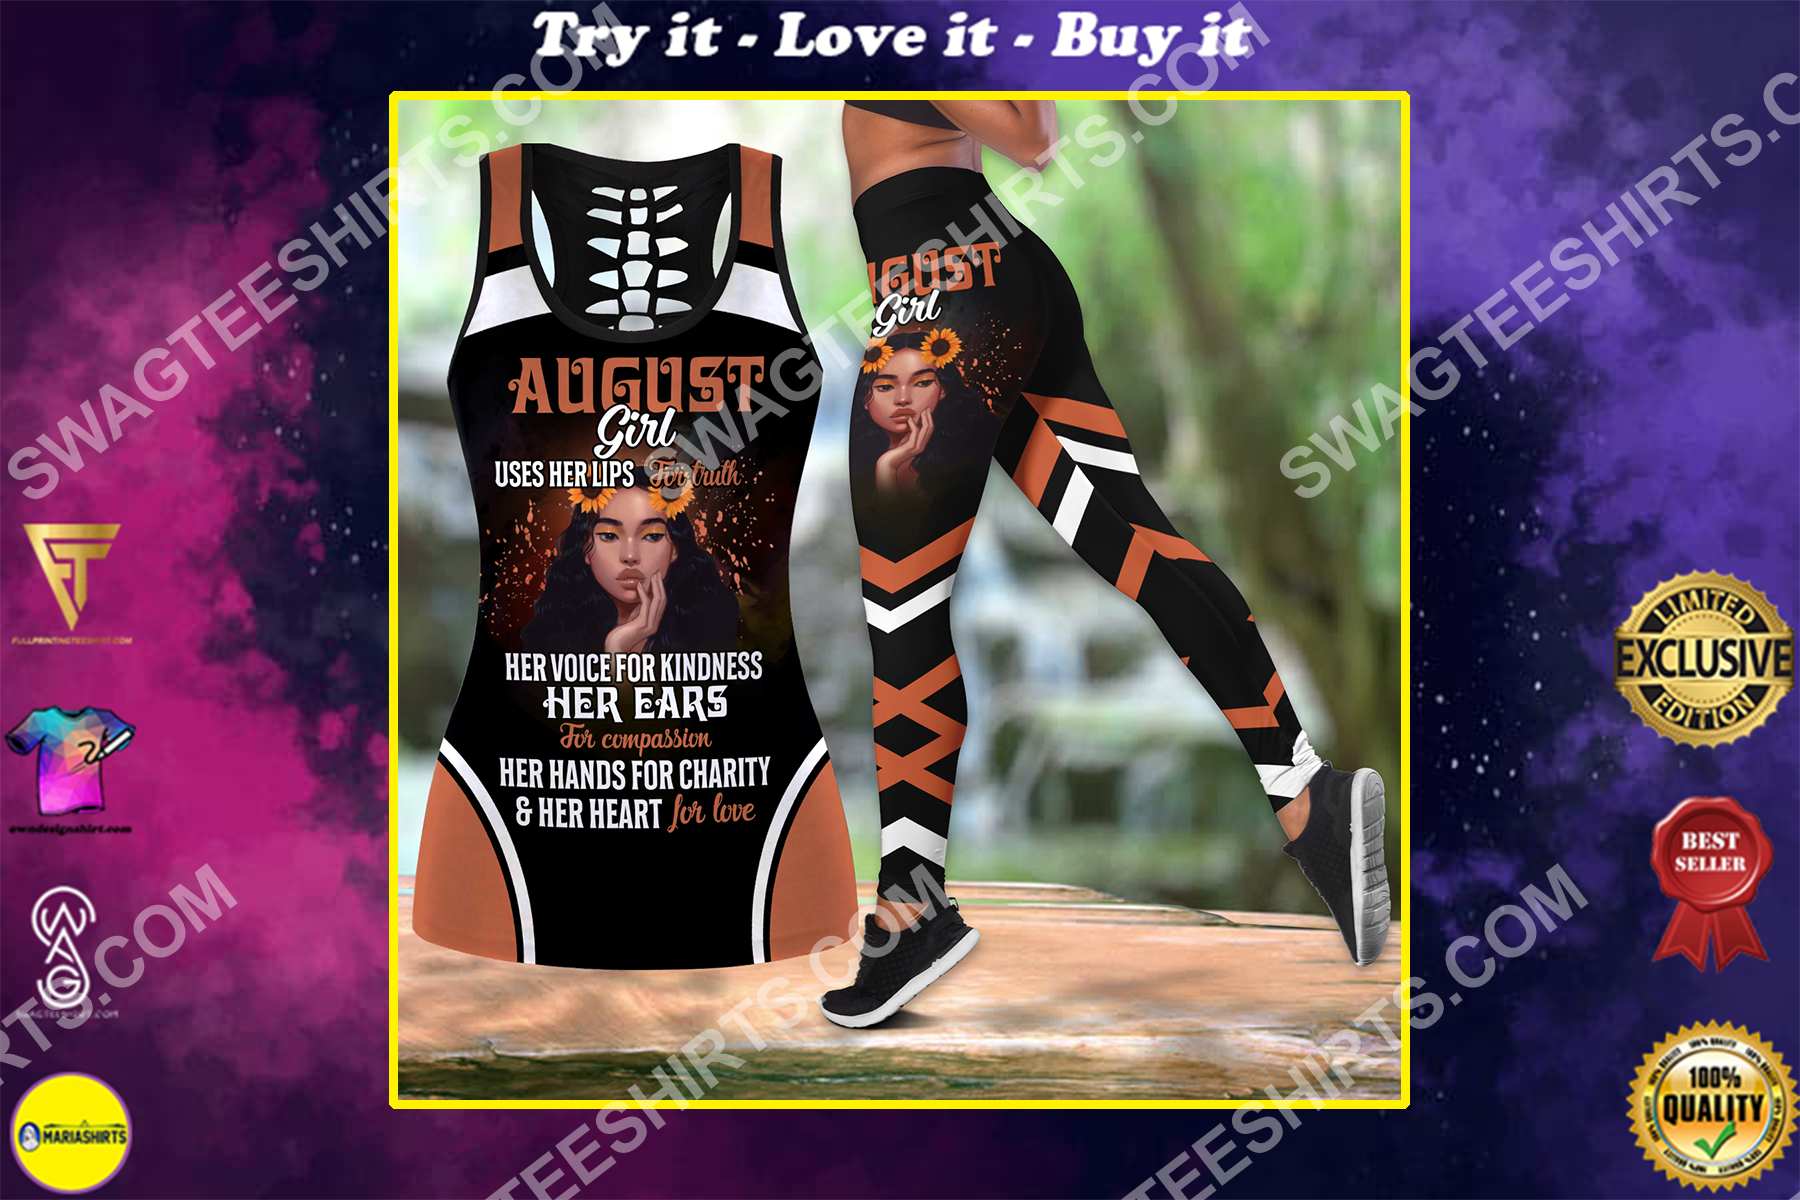 august girl uses her lips for truth birthday gift set sports outfit